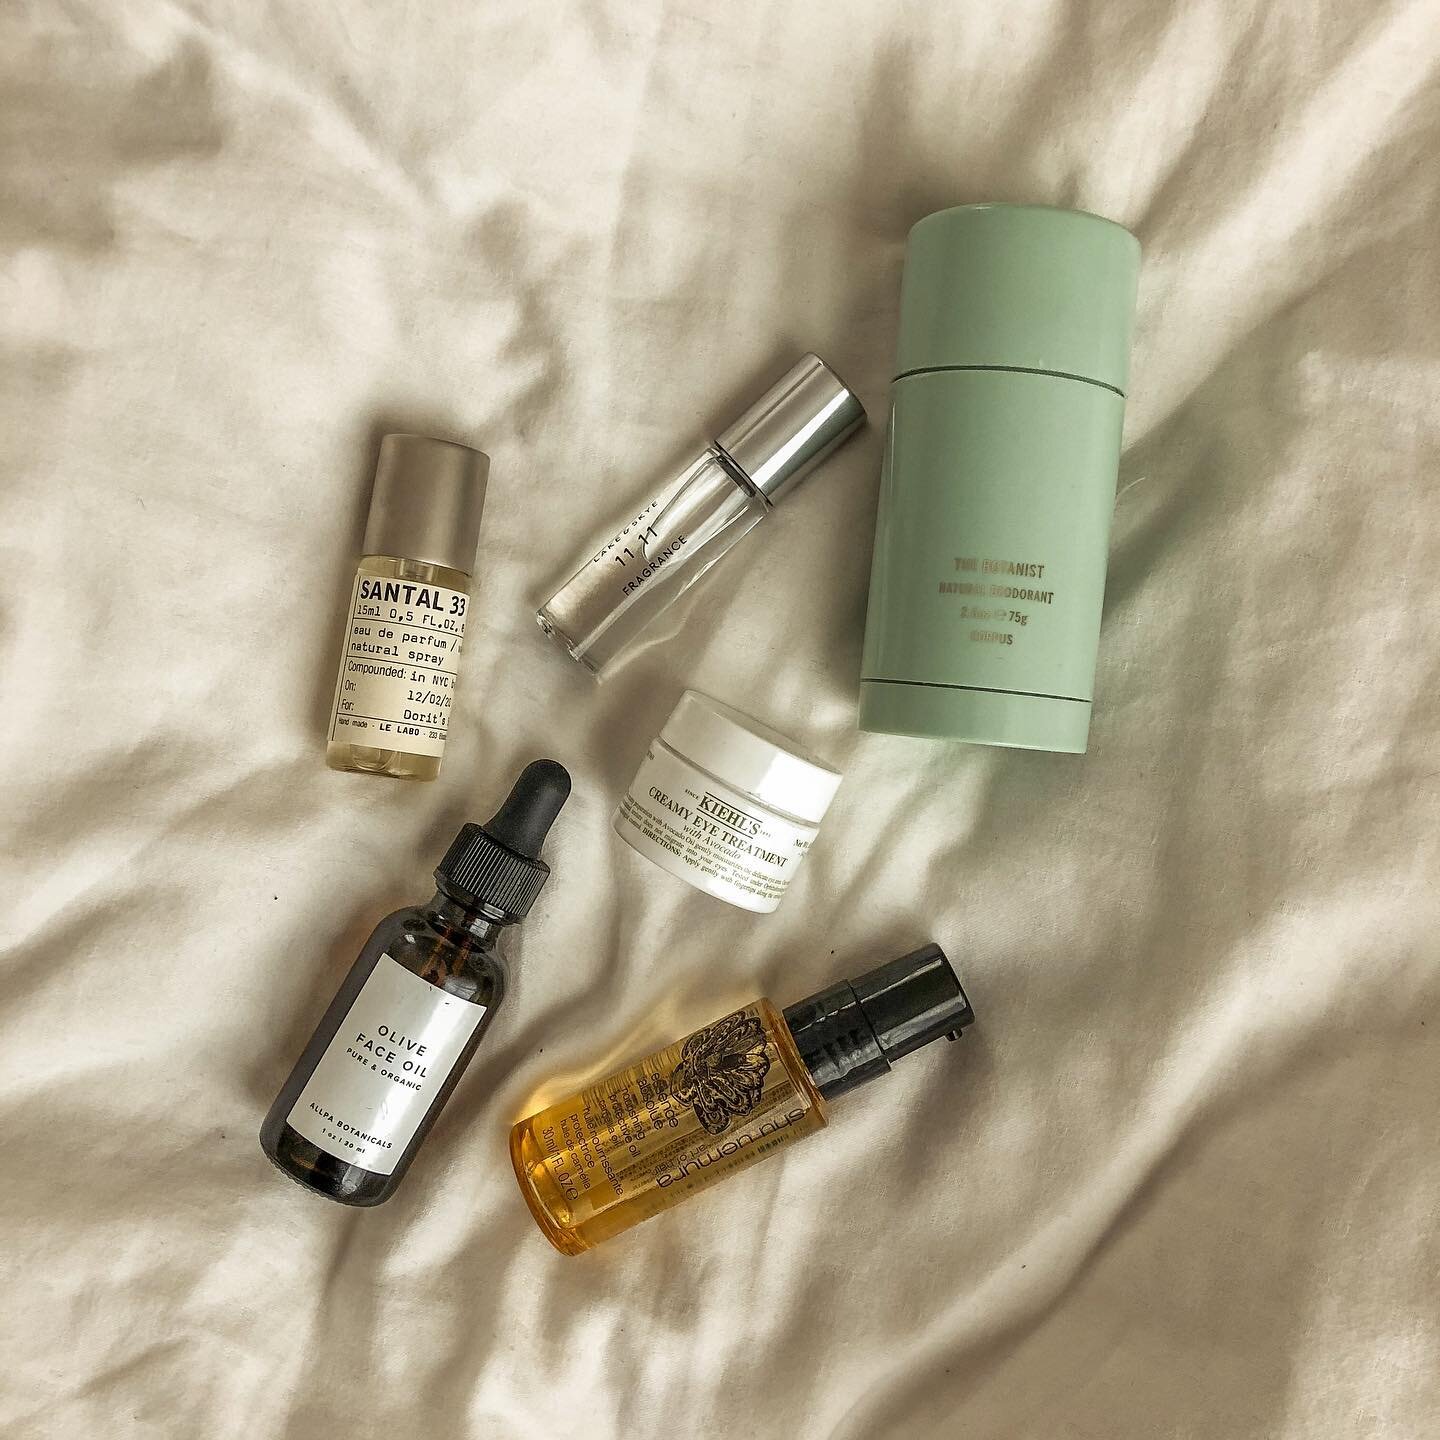 Sometimes it just takes a beauty product or two to cheer me up, ya know? So I wanted to share some products I use practically everyday. I&rsquo;m pretty obsessed with all of them. Some brands are small (which I love discovering!), and some big..but a